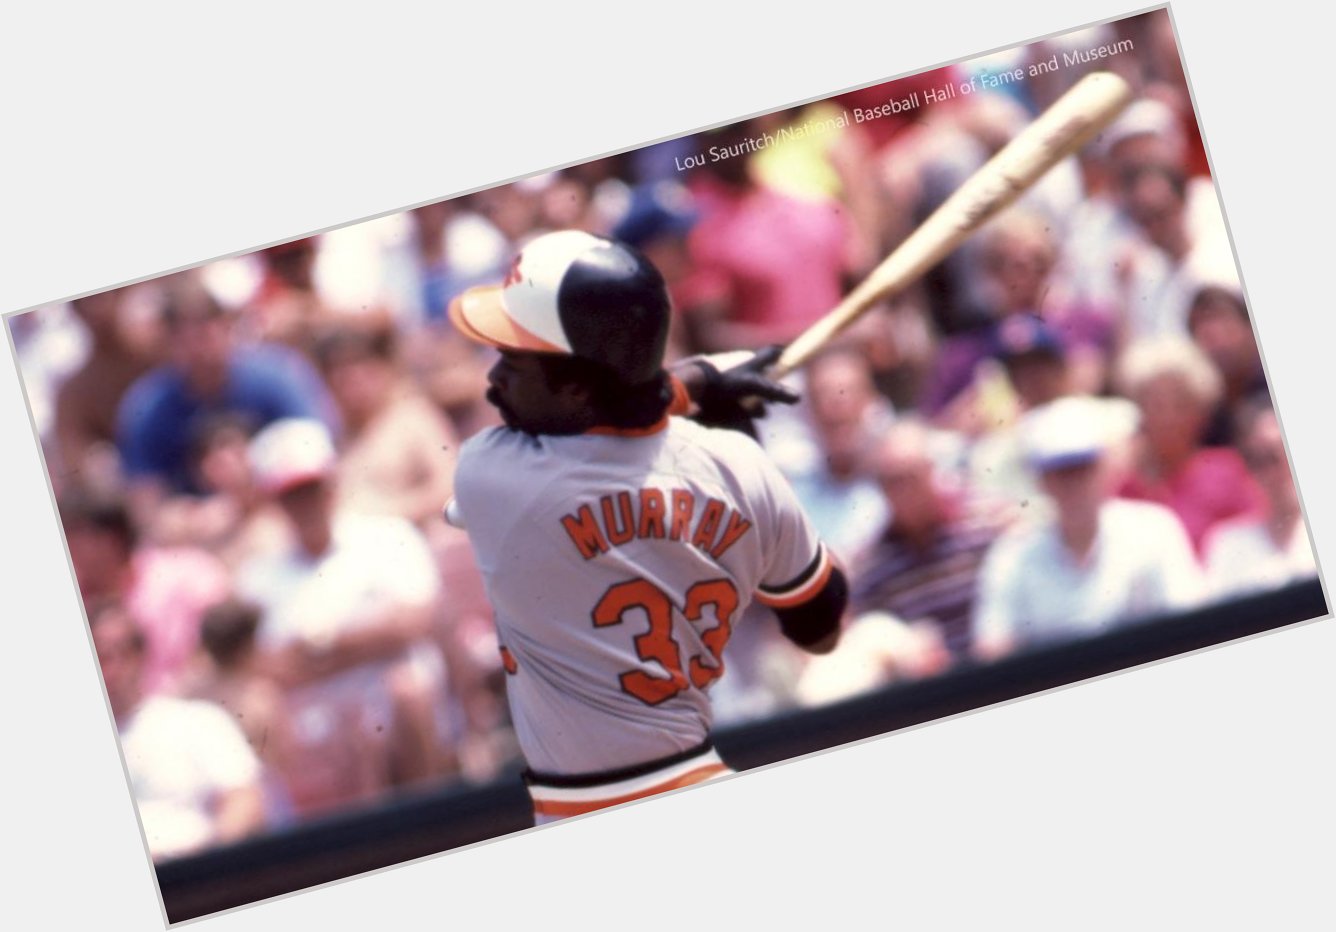 Happy Birthday shout out to the greatest switch hitter i have ever seen. Eddie Murray turns 64 